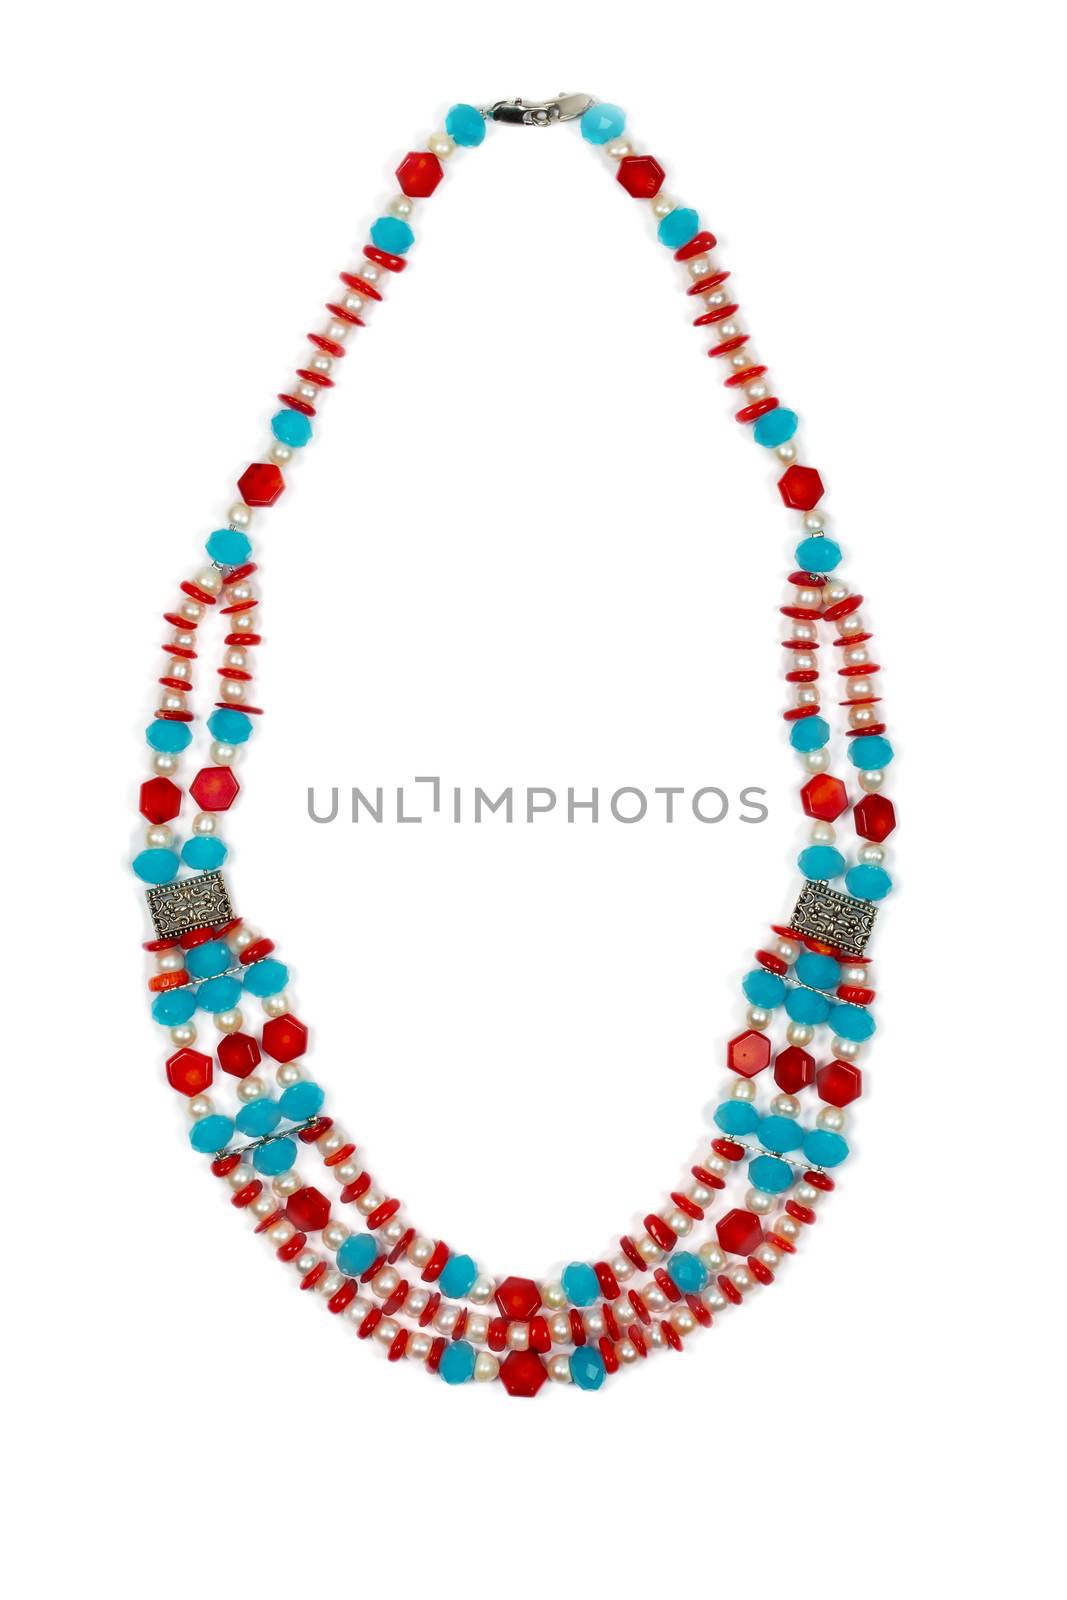 Necklace made of pearls and coral isolated on white background